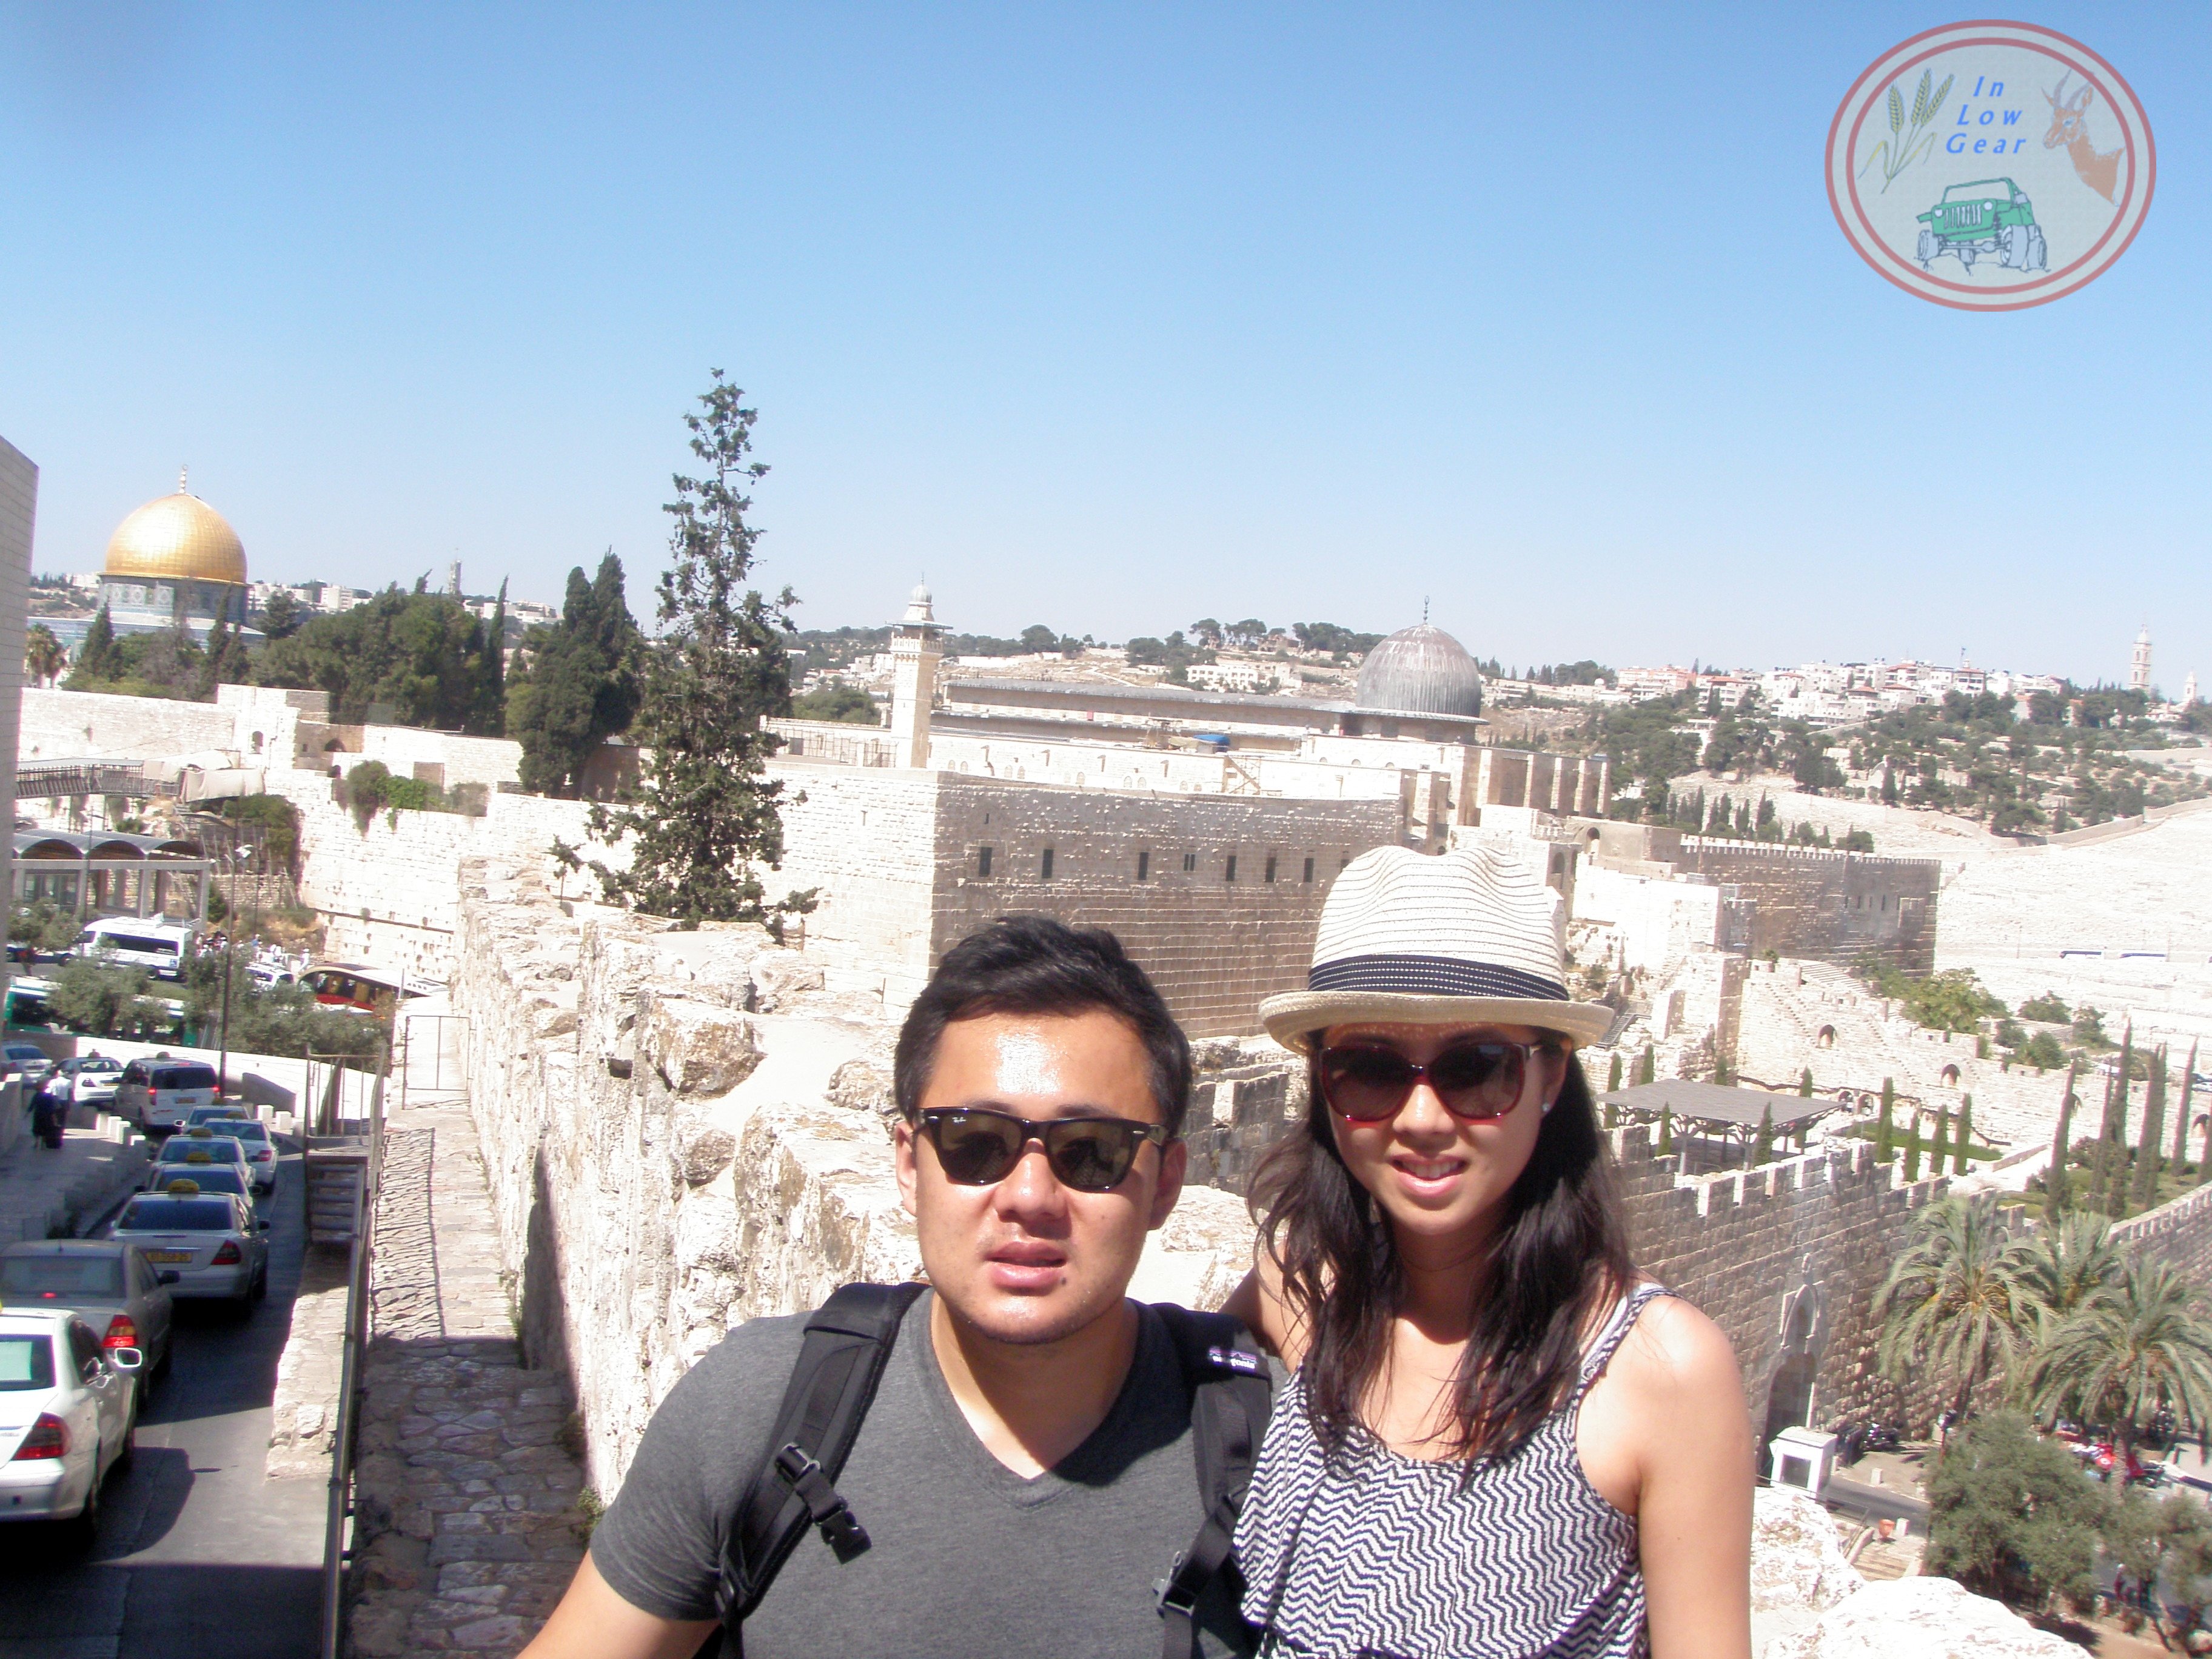 Jerusalem Mt. of Olives, the old city walls, El Aqsa and Dome of the Rock